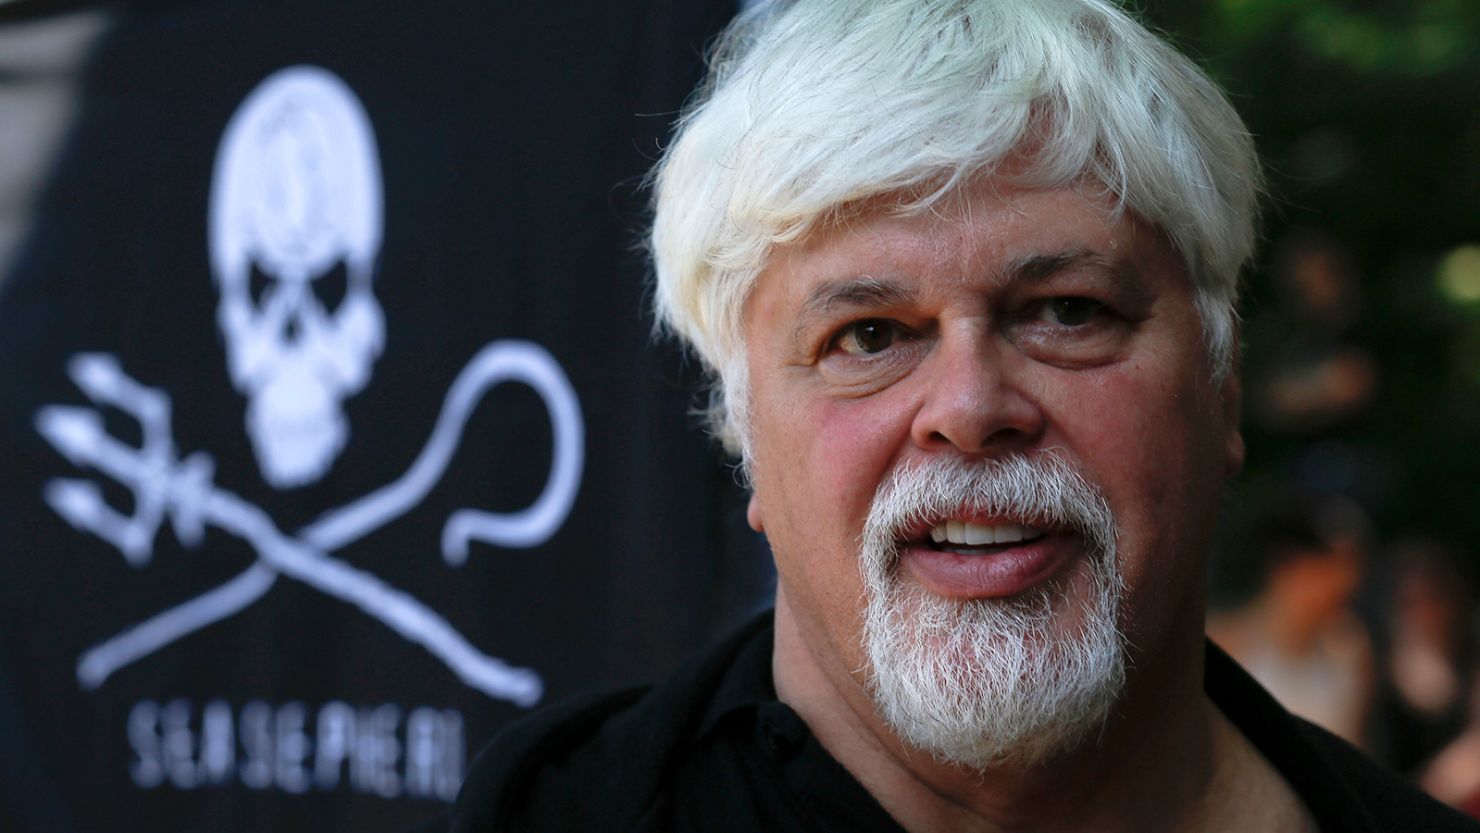 Environmentalist Paul Watson Detained Amidst International Controversy